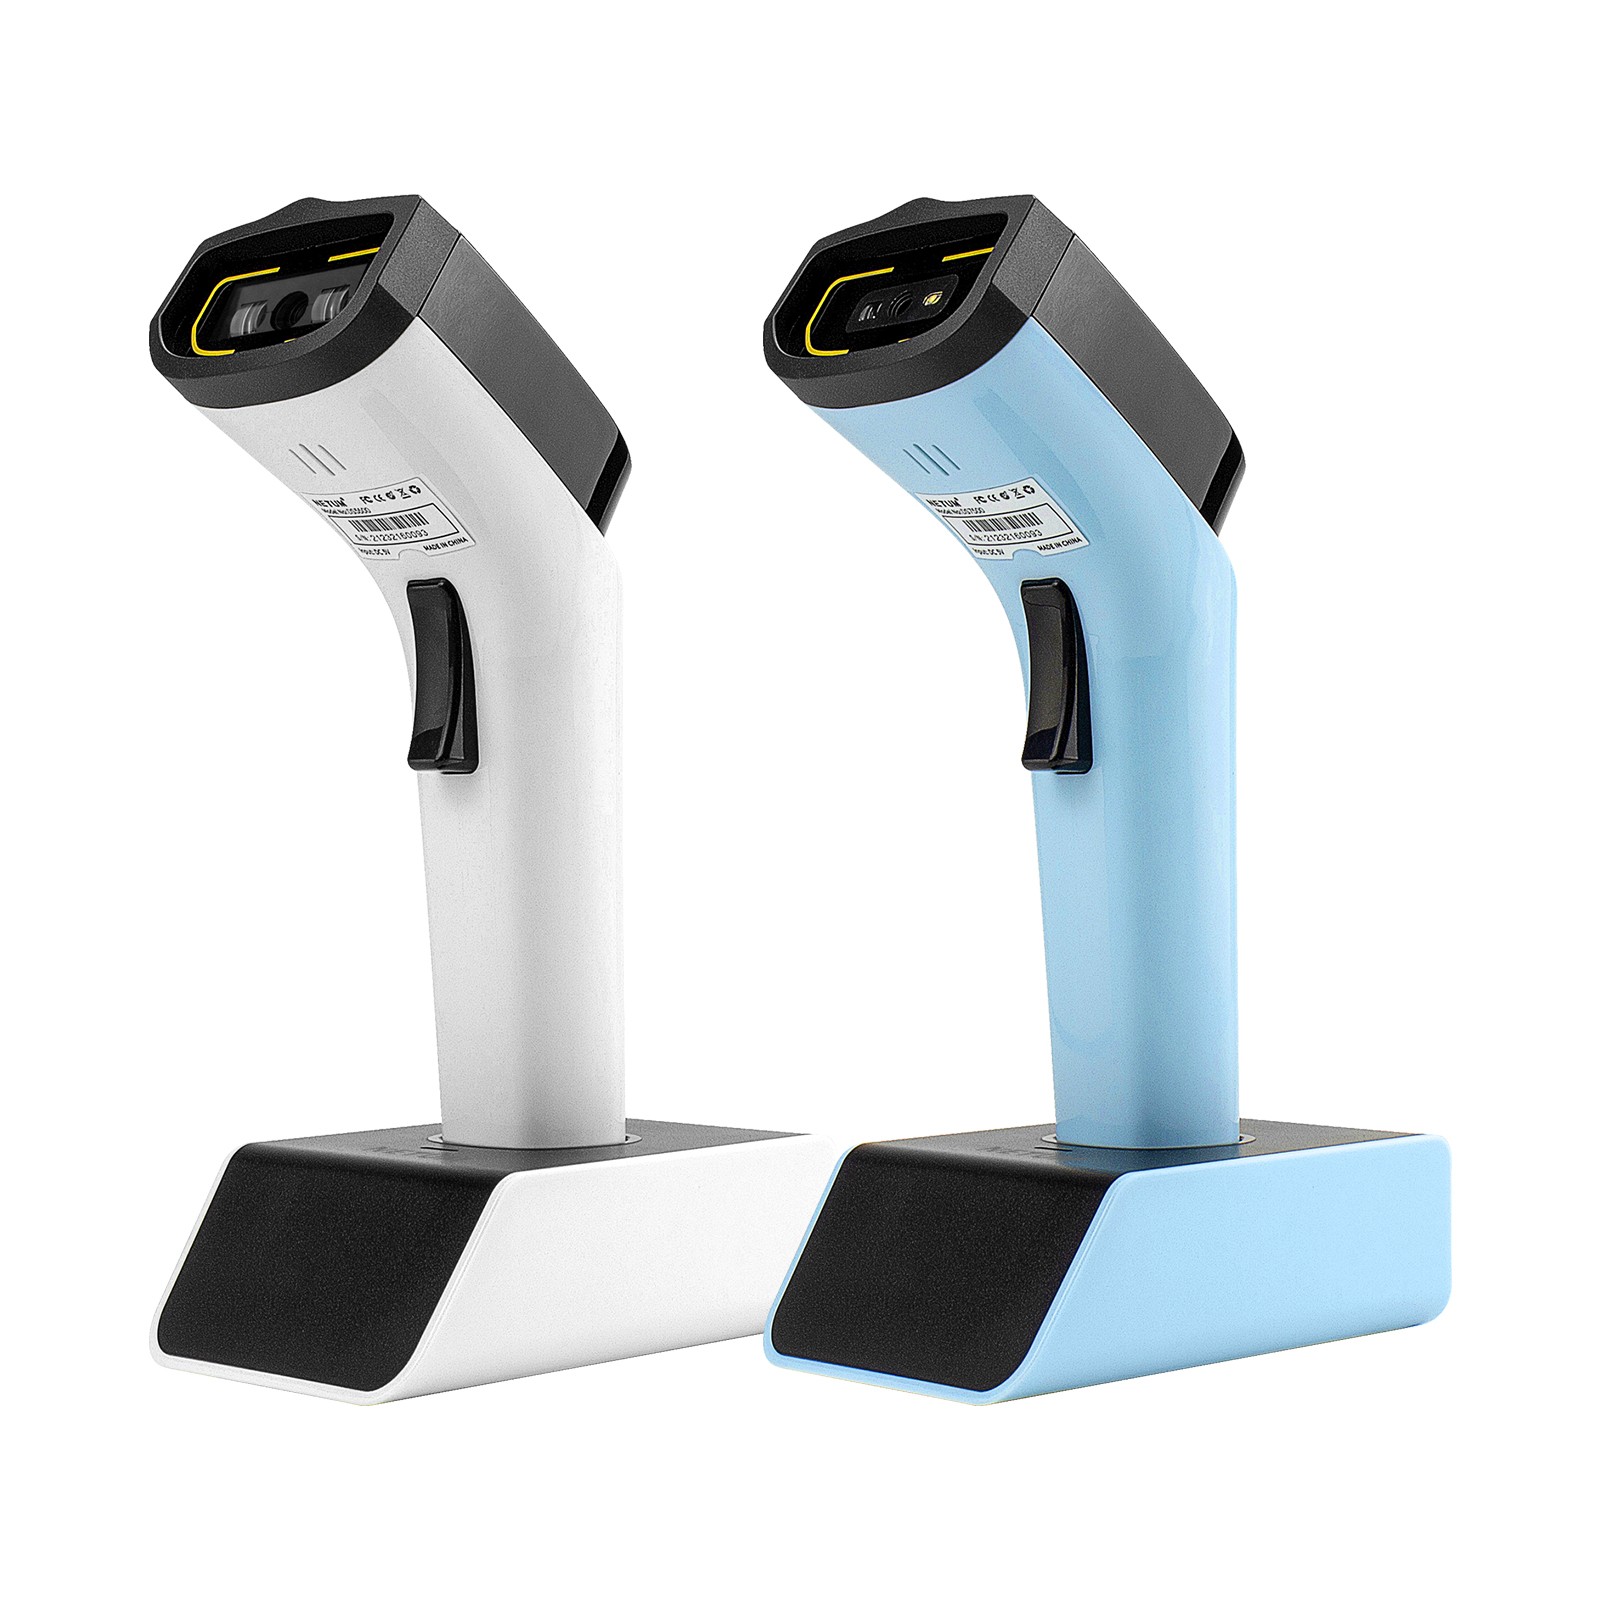 3 Best Handheld Barcode Scanners for Scanning QR Codes